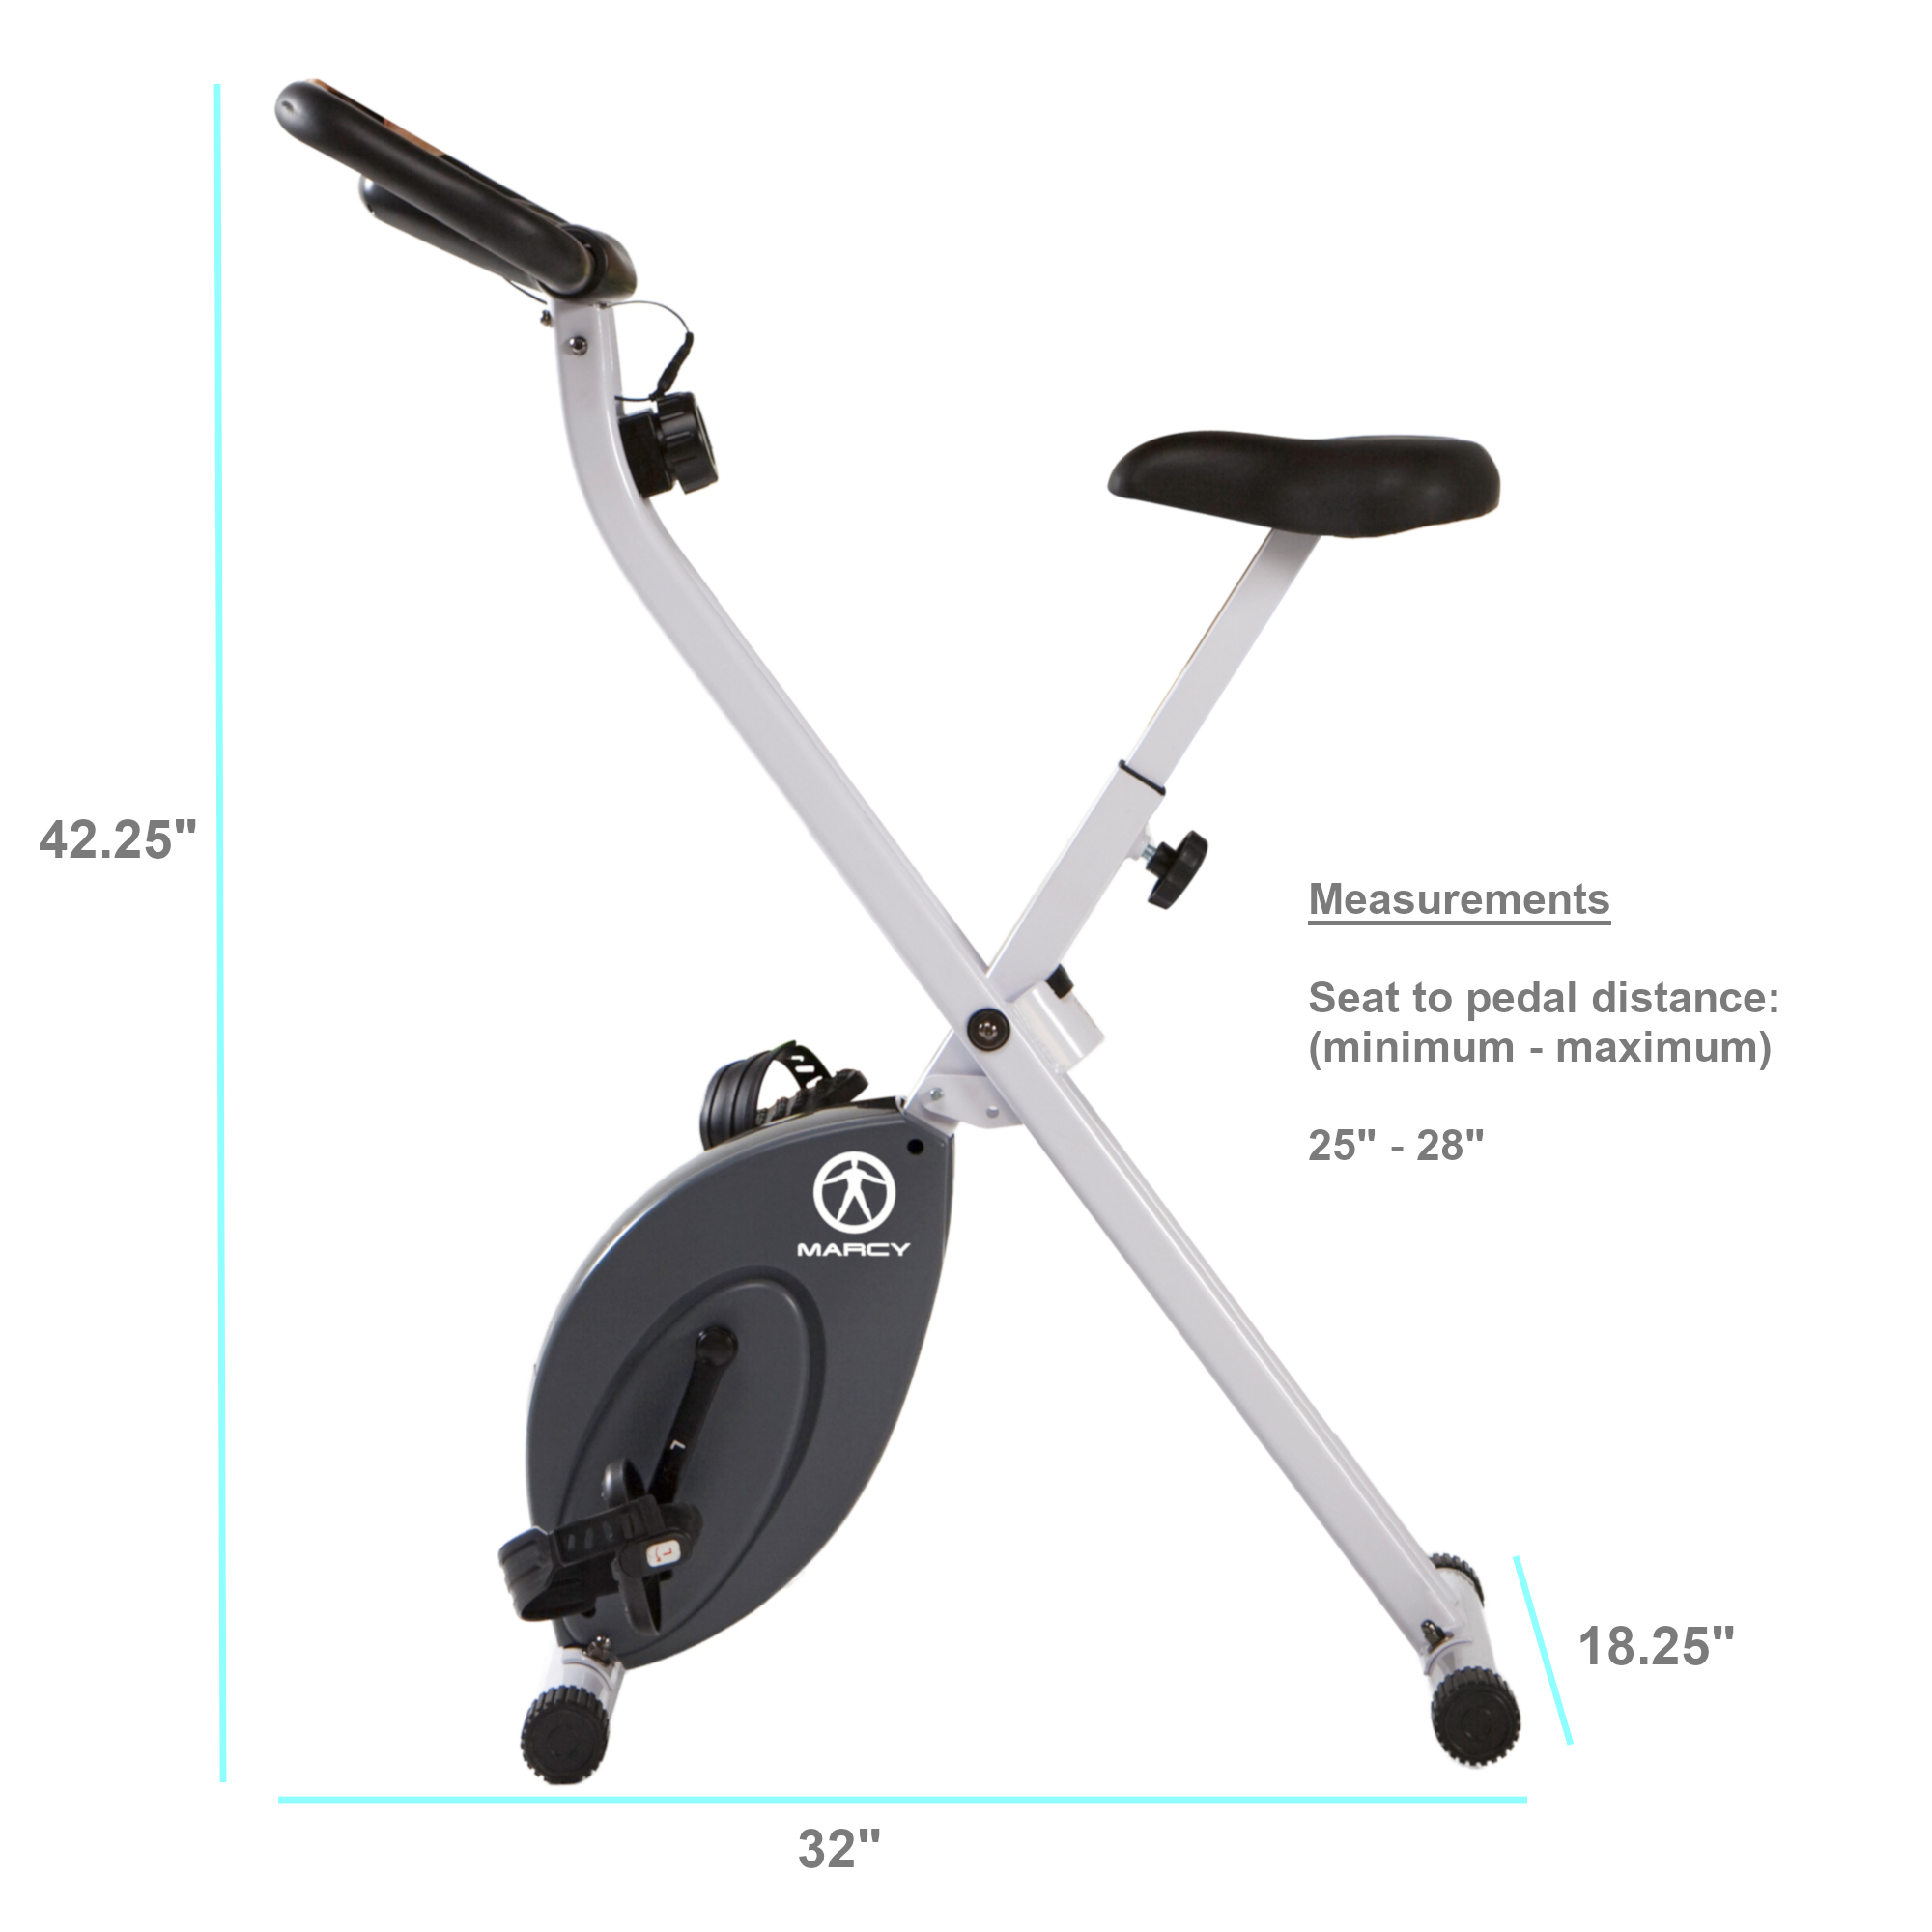 Marcy Foldable Exercise Bike Compact Cycling NS-652 - image 8 of 8